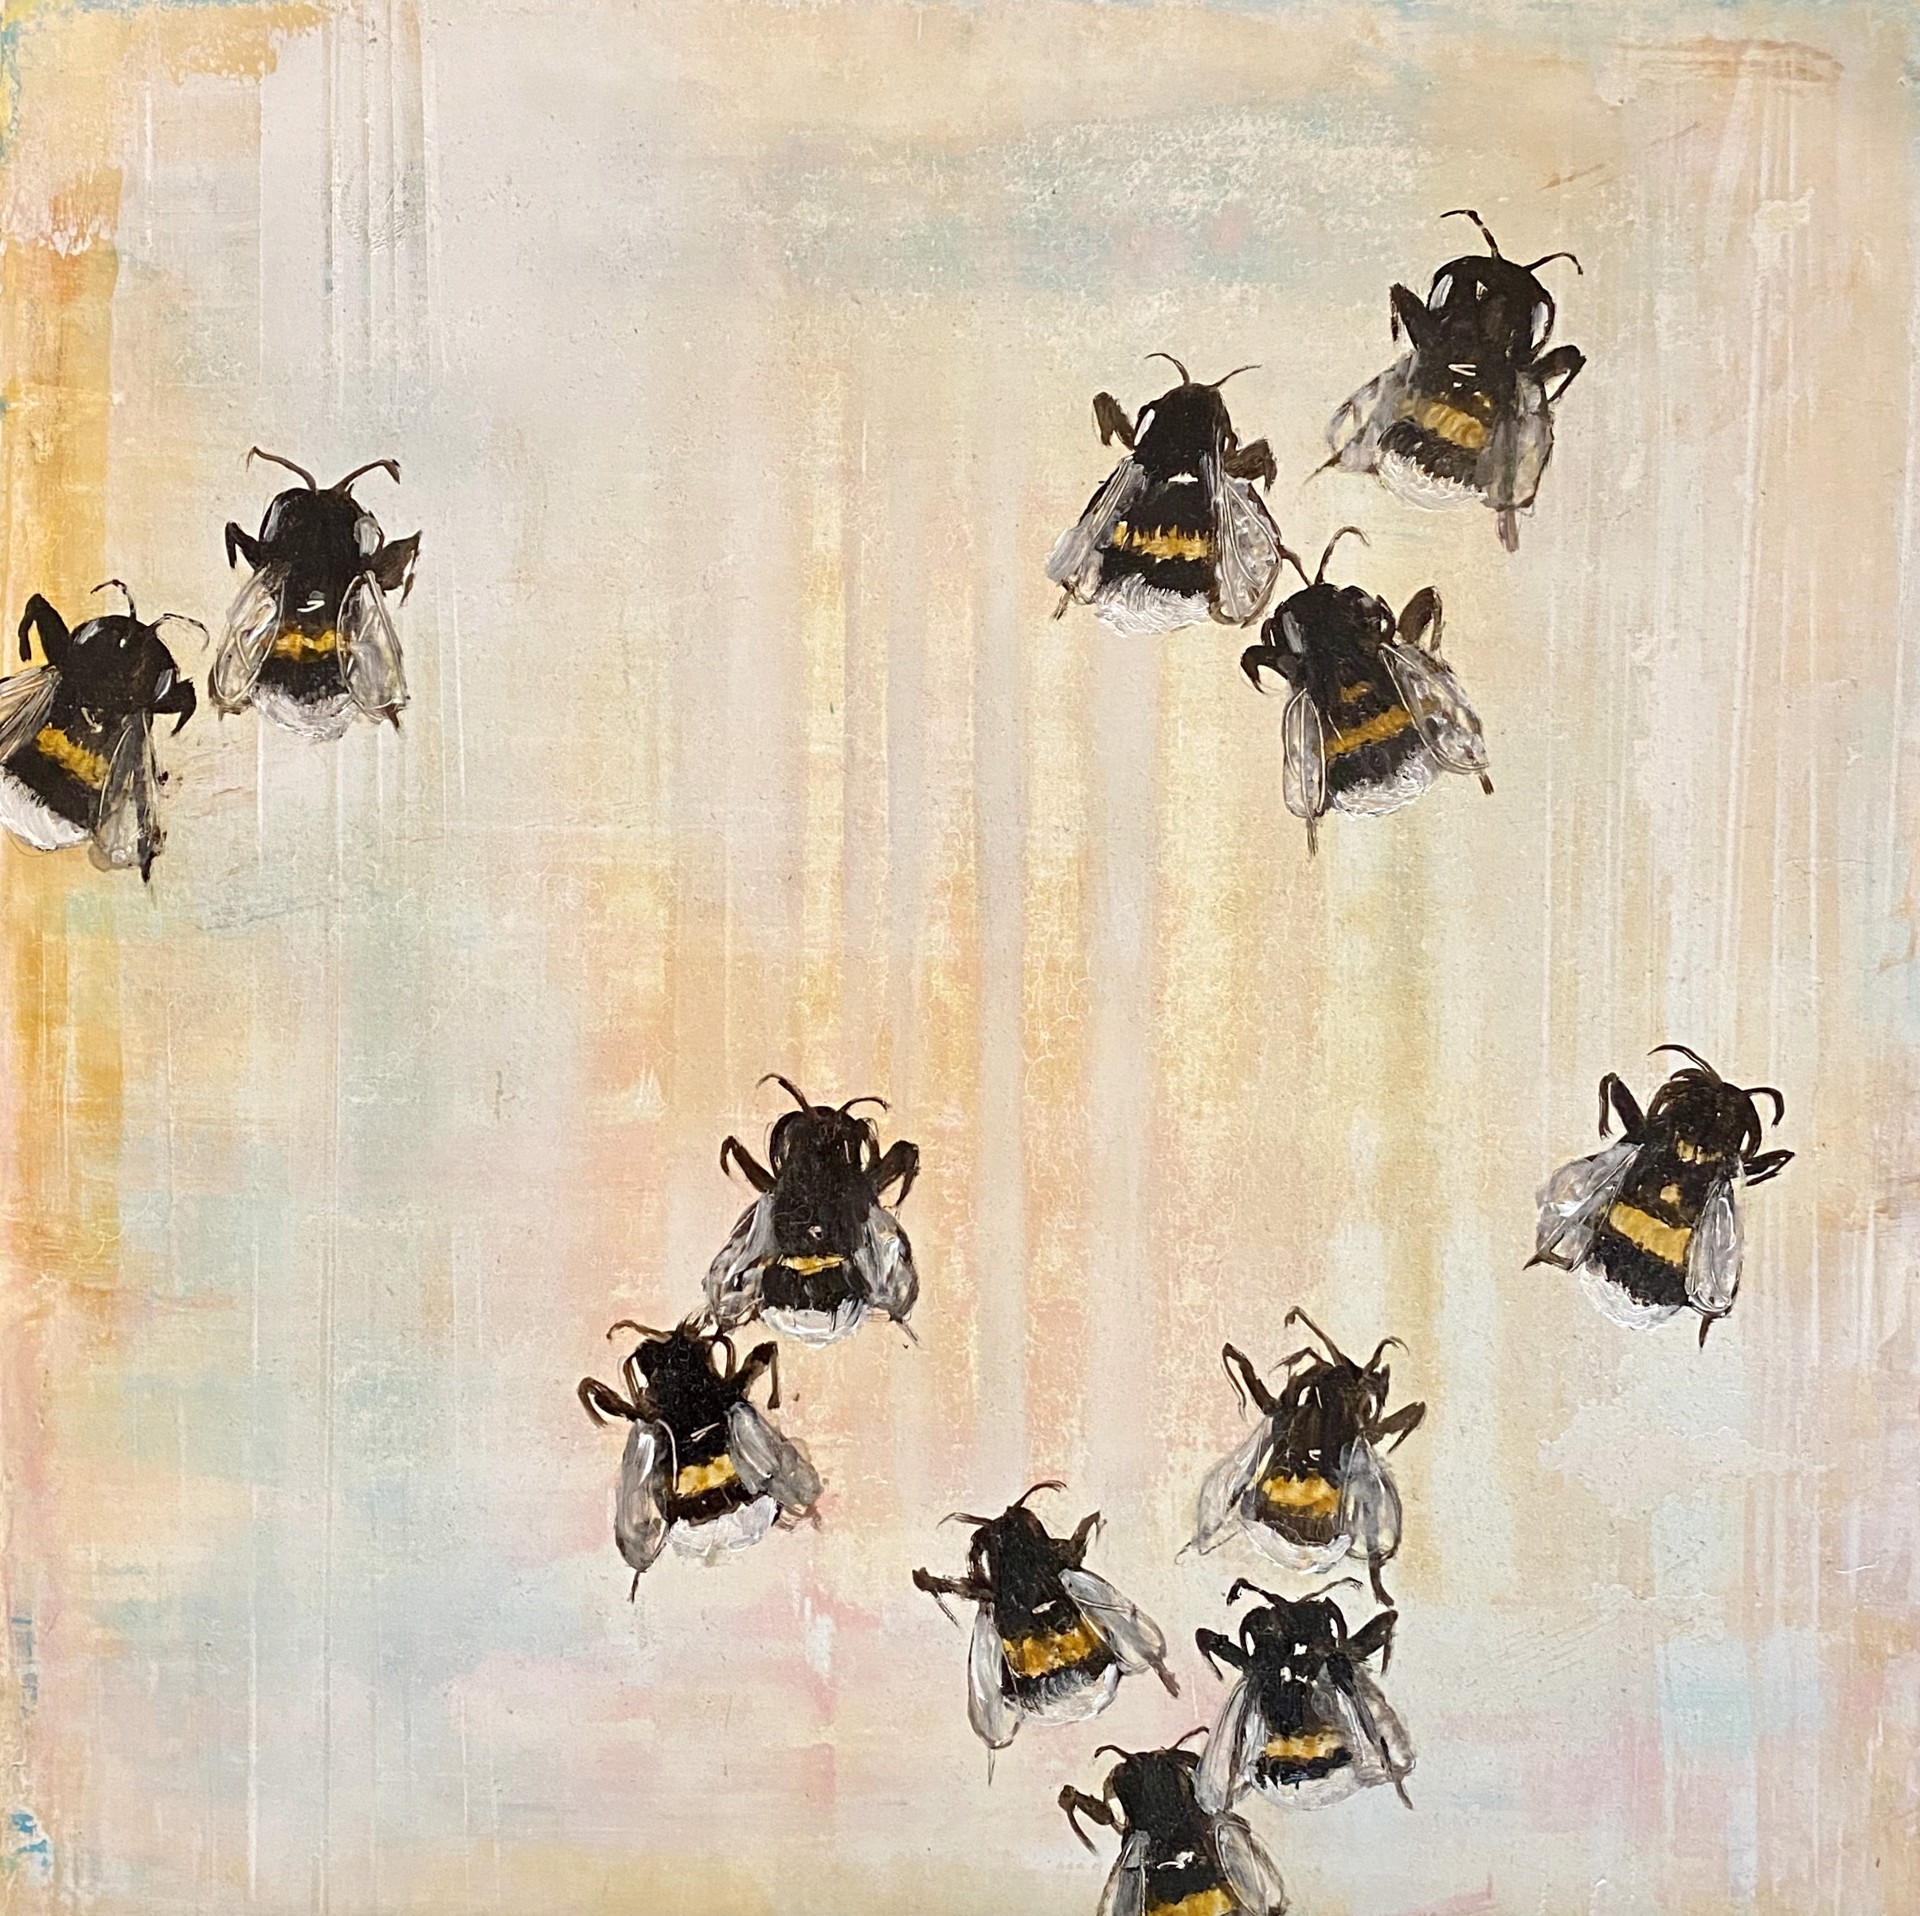 Original Contemporary Oil Painting Of Bees With An Abstract Pastel Background, By Jenna Von Benedikt